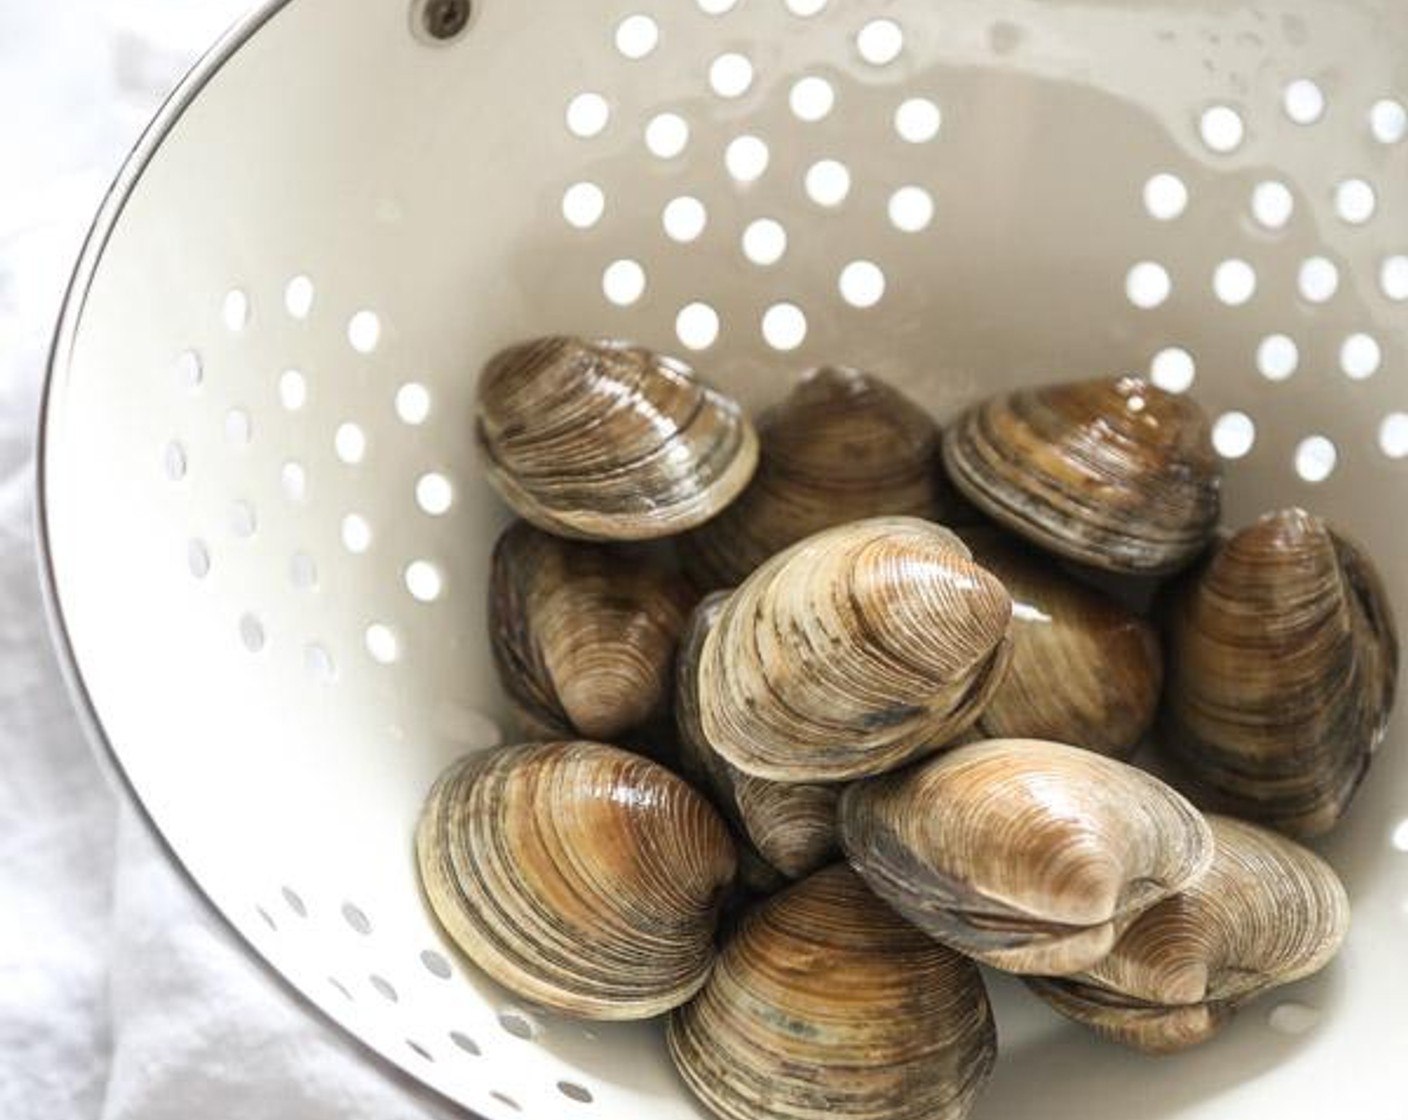 step 1 Rinse the Littleneck Clams (2 lb) well and place in a large mixing bowl. Cover with cold water and soak while prepping the remaining ingredients.